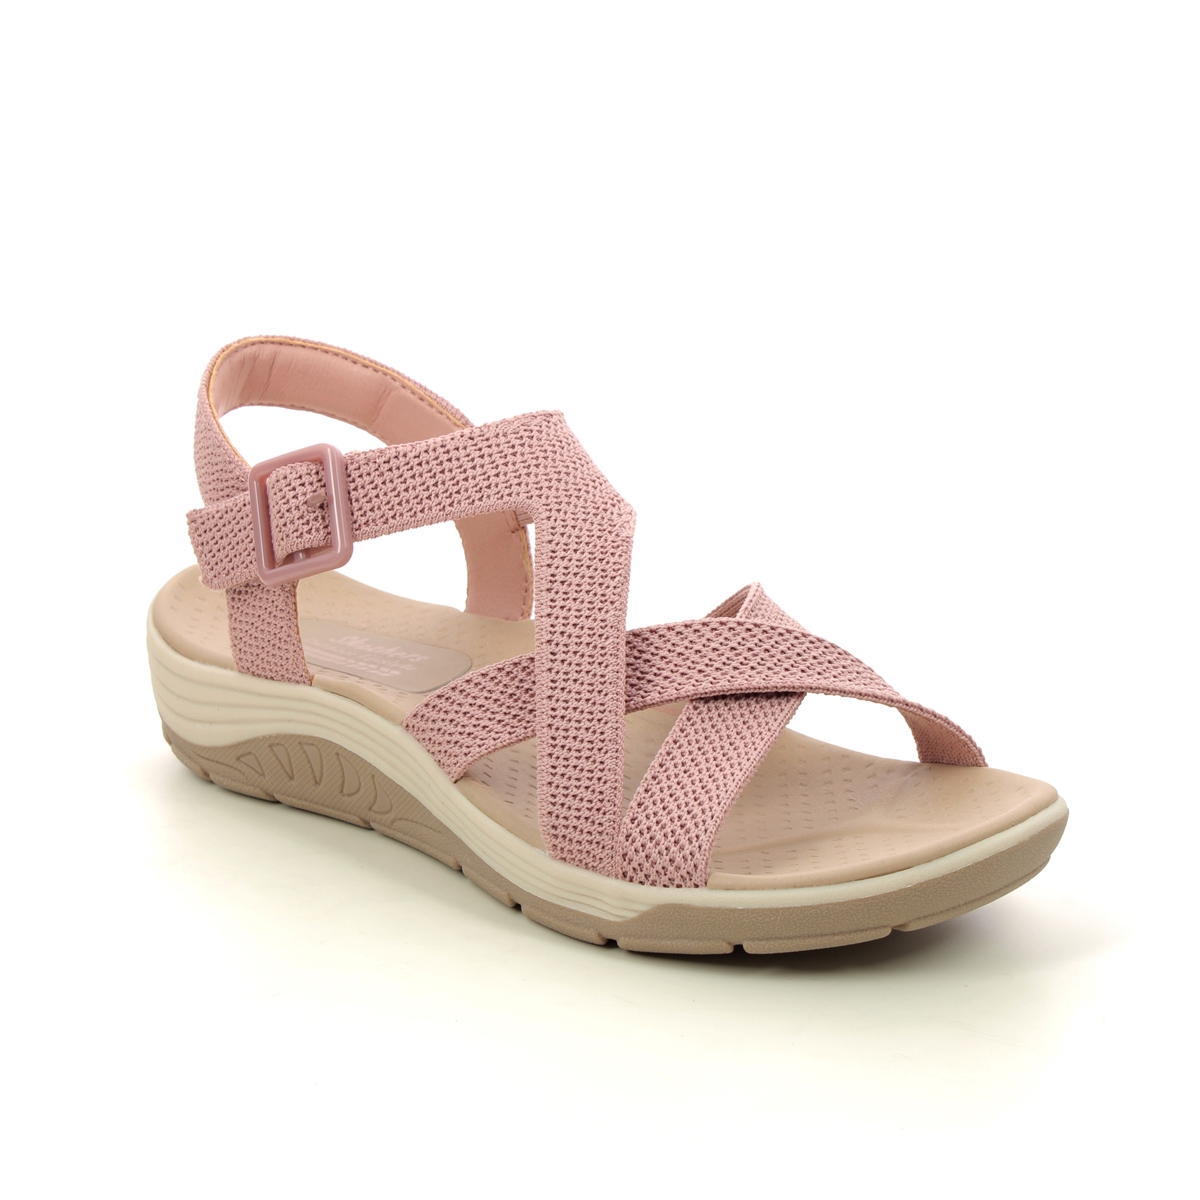 Skechers Reggae Cup BLSH Blush Pink Womens Comfortable Sandals 163198 in a Plain Textile in Size 8